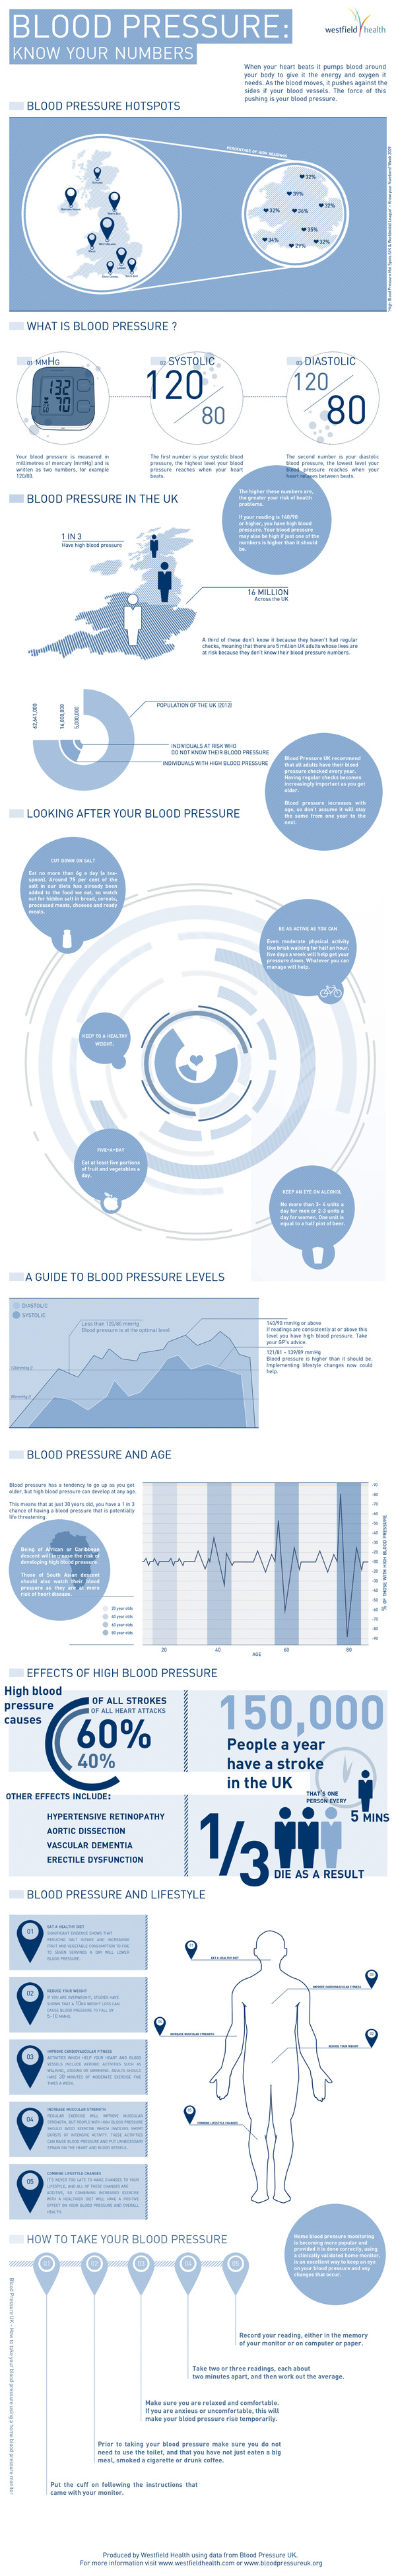 Blood Pressure: Know Your Numbers